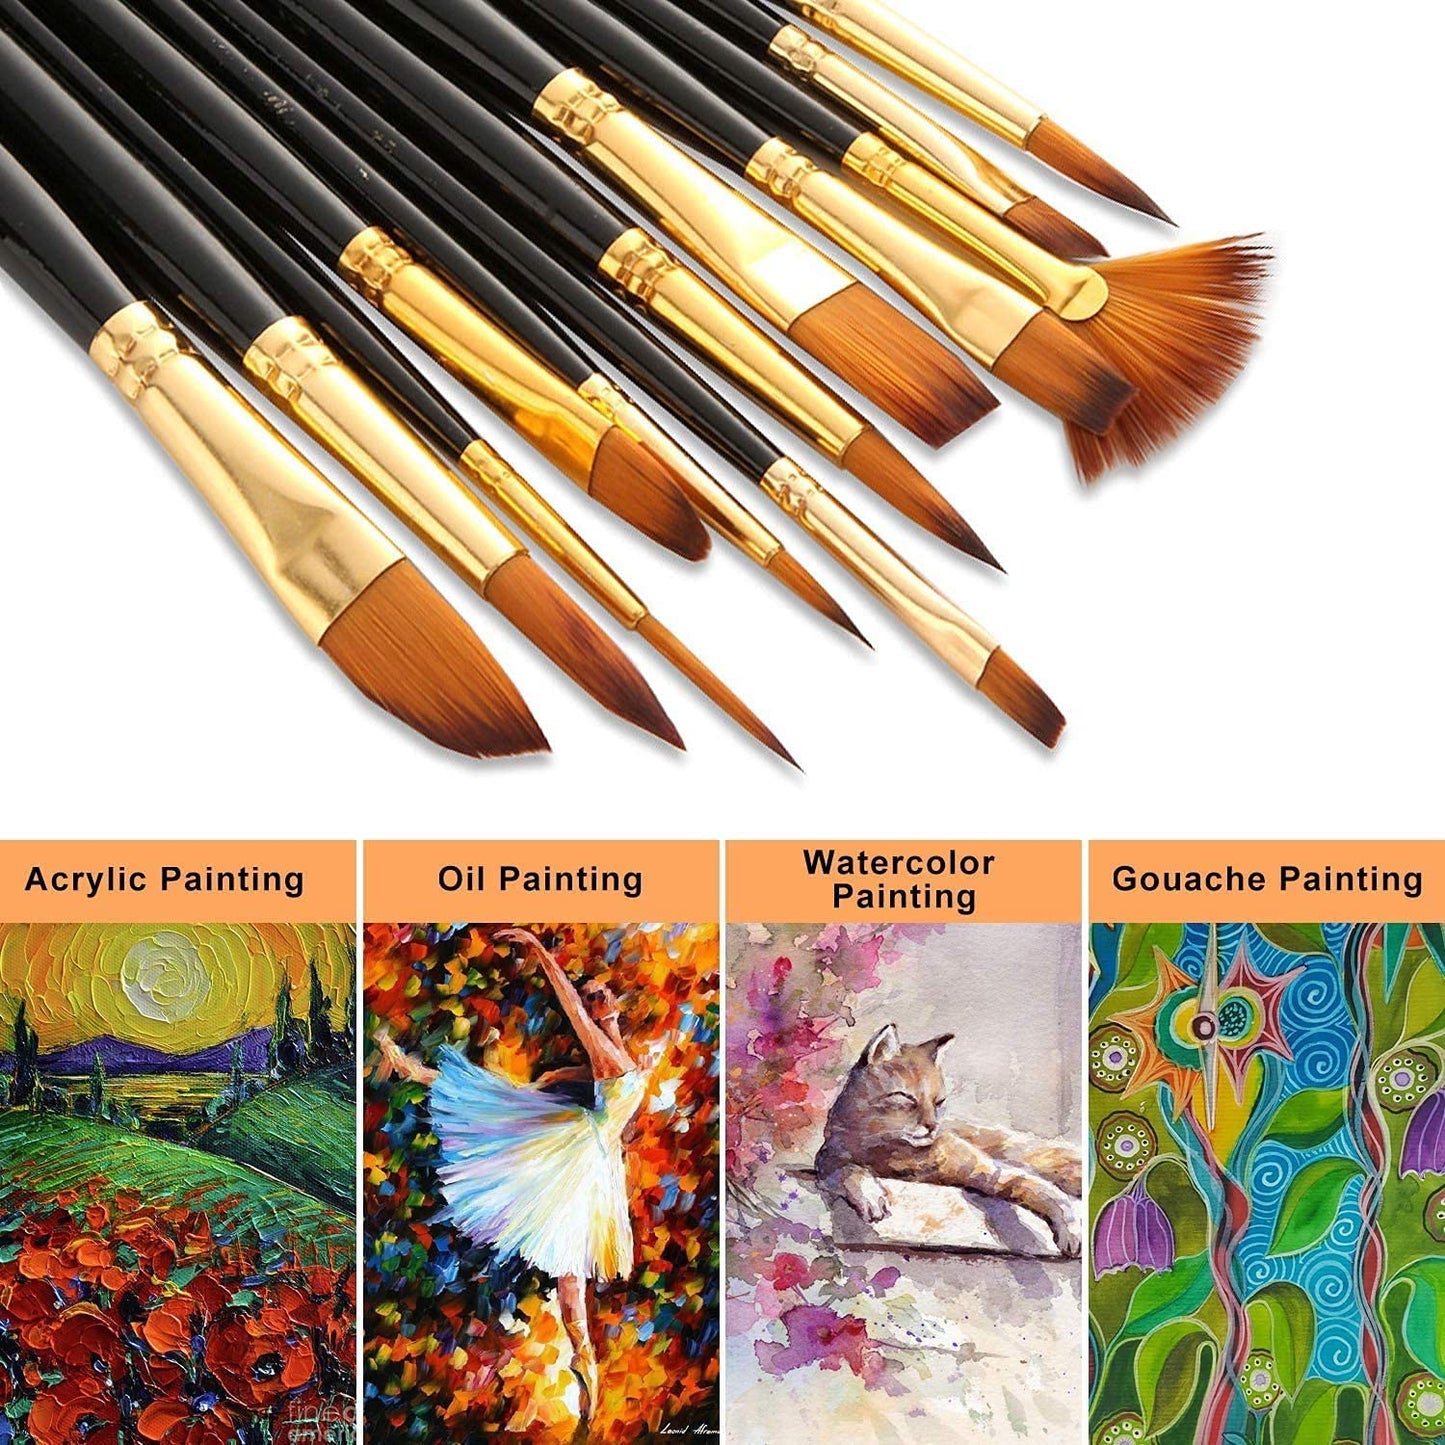 S2C Professional Artist Paint Brushes set with Nylon Hair Painting Brush Great for Acrylic, Face, Nail Art, Body Art, Miniature Detailing & Rock Painting.Great For Kids and Adults